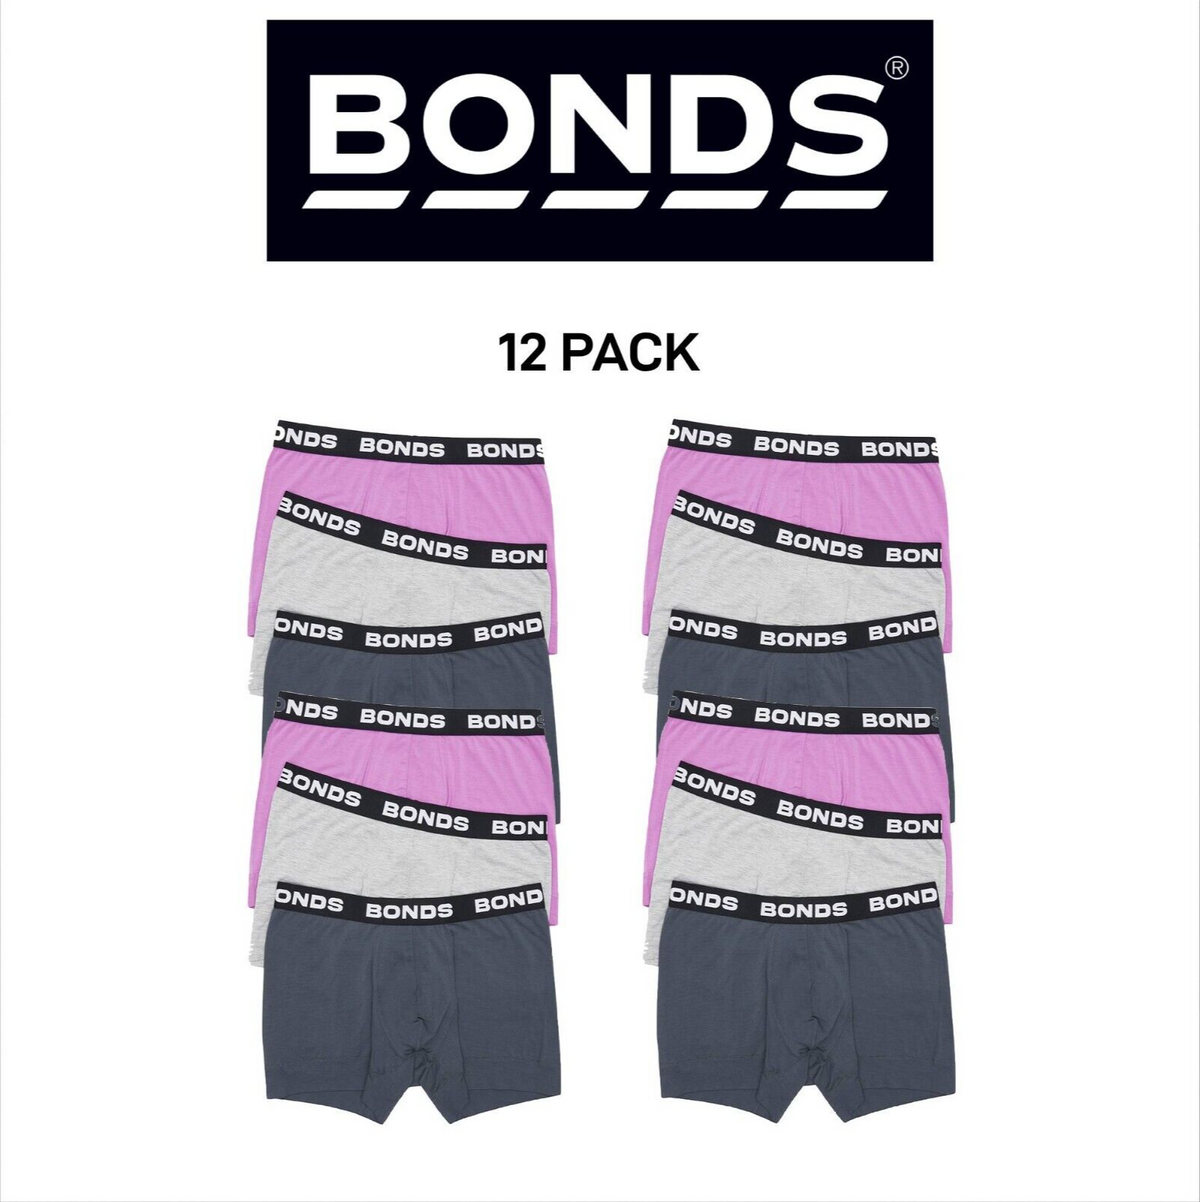 Bonds Mens Total Package Trunk Comfy Super Soft and Breathable 12 Pack MWK83A